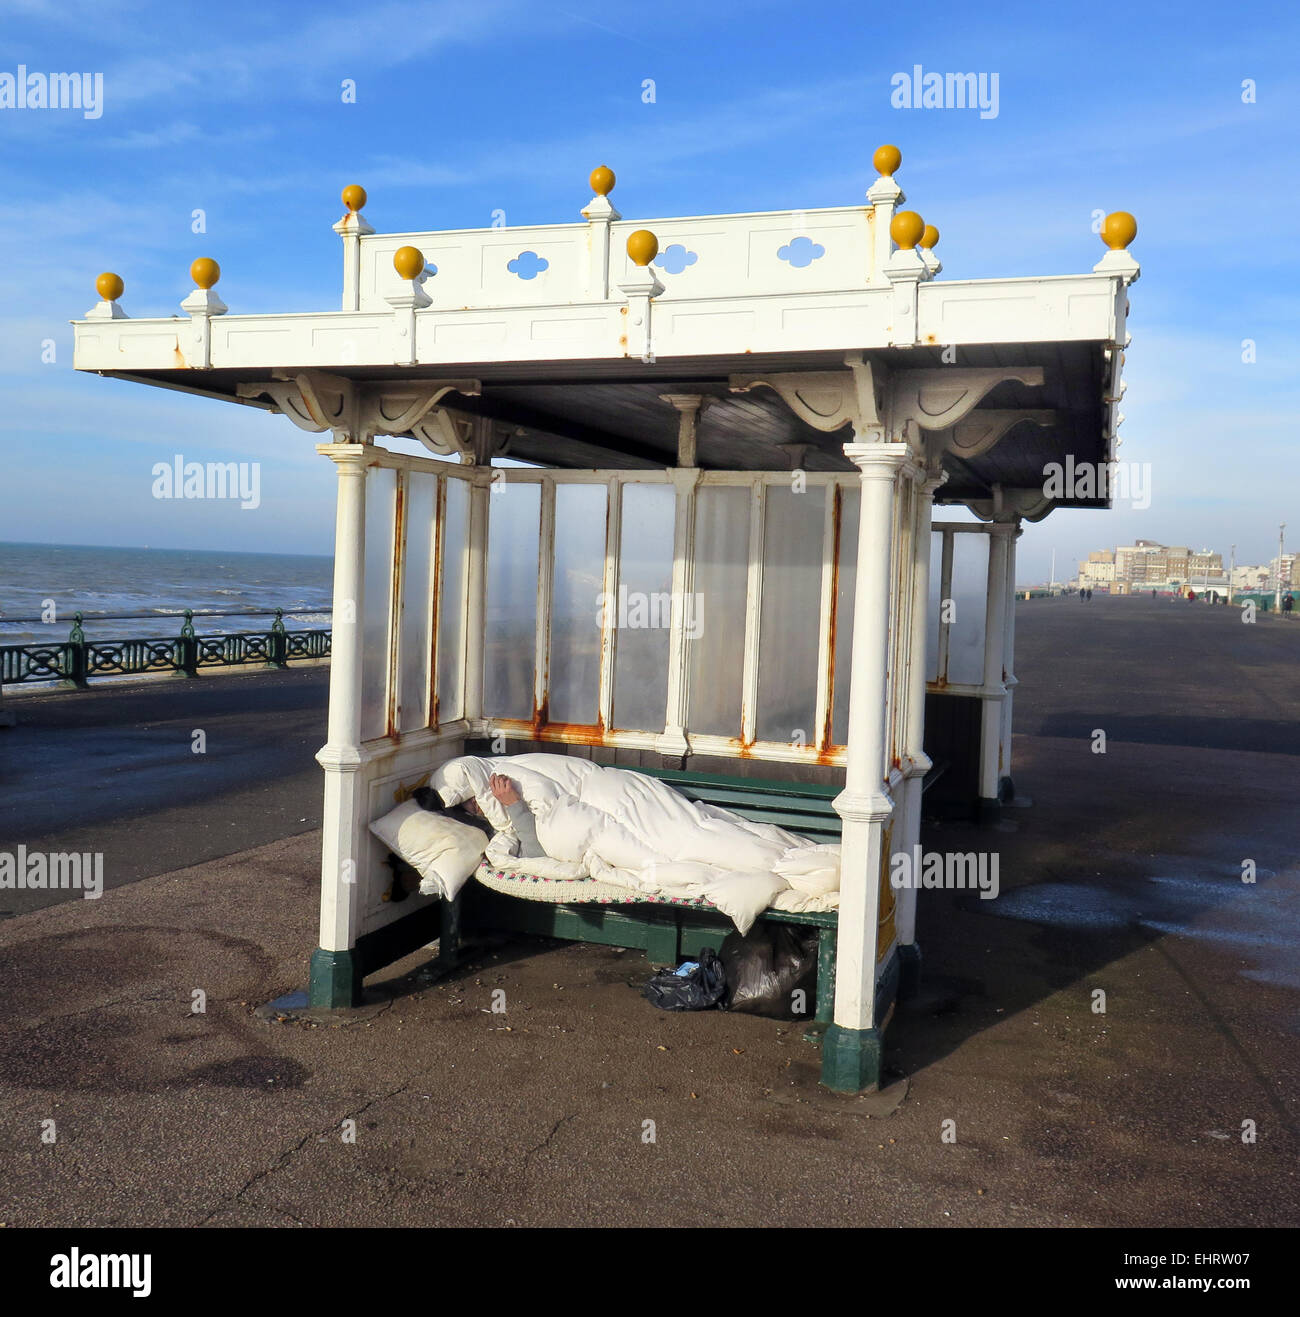 A Homeless man enjoys a cigarette while wrapped up in a sleeping bag from the cold in an Edwardian seafront shelter on Hove promenade in the City of Brighton and Hove, East Sussex Stock Photo